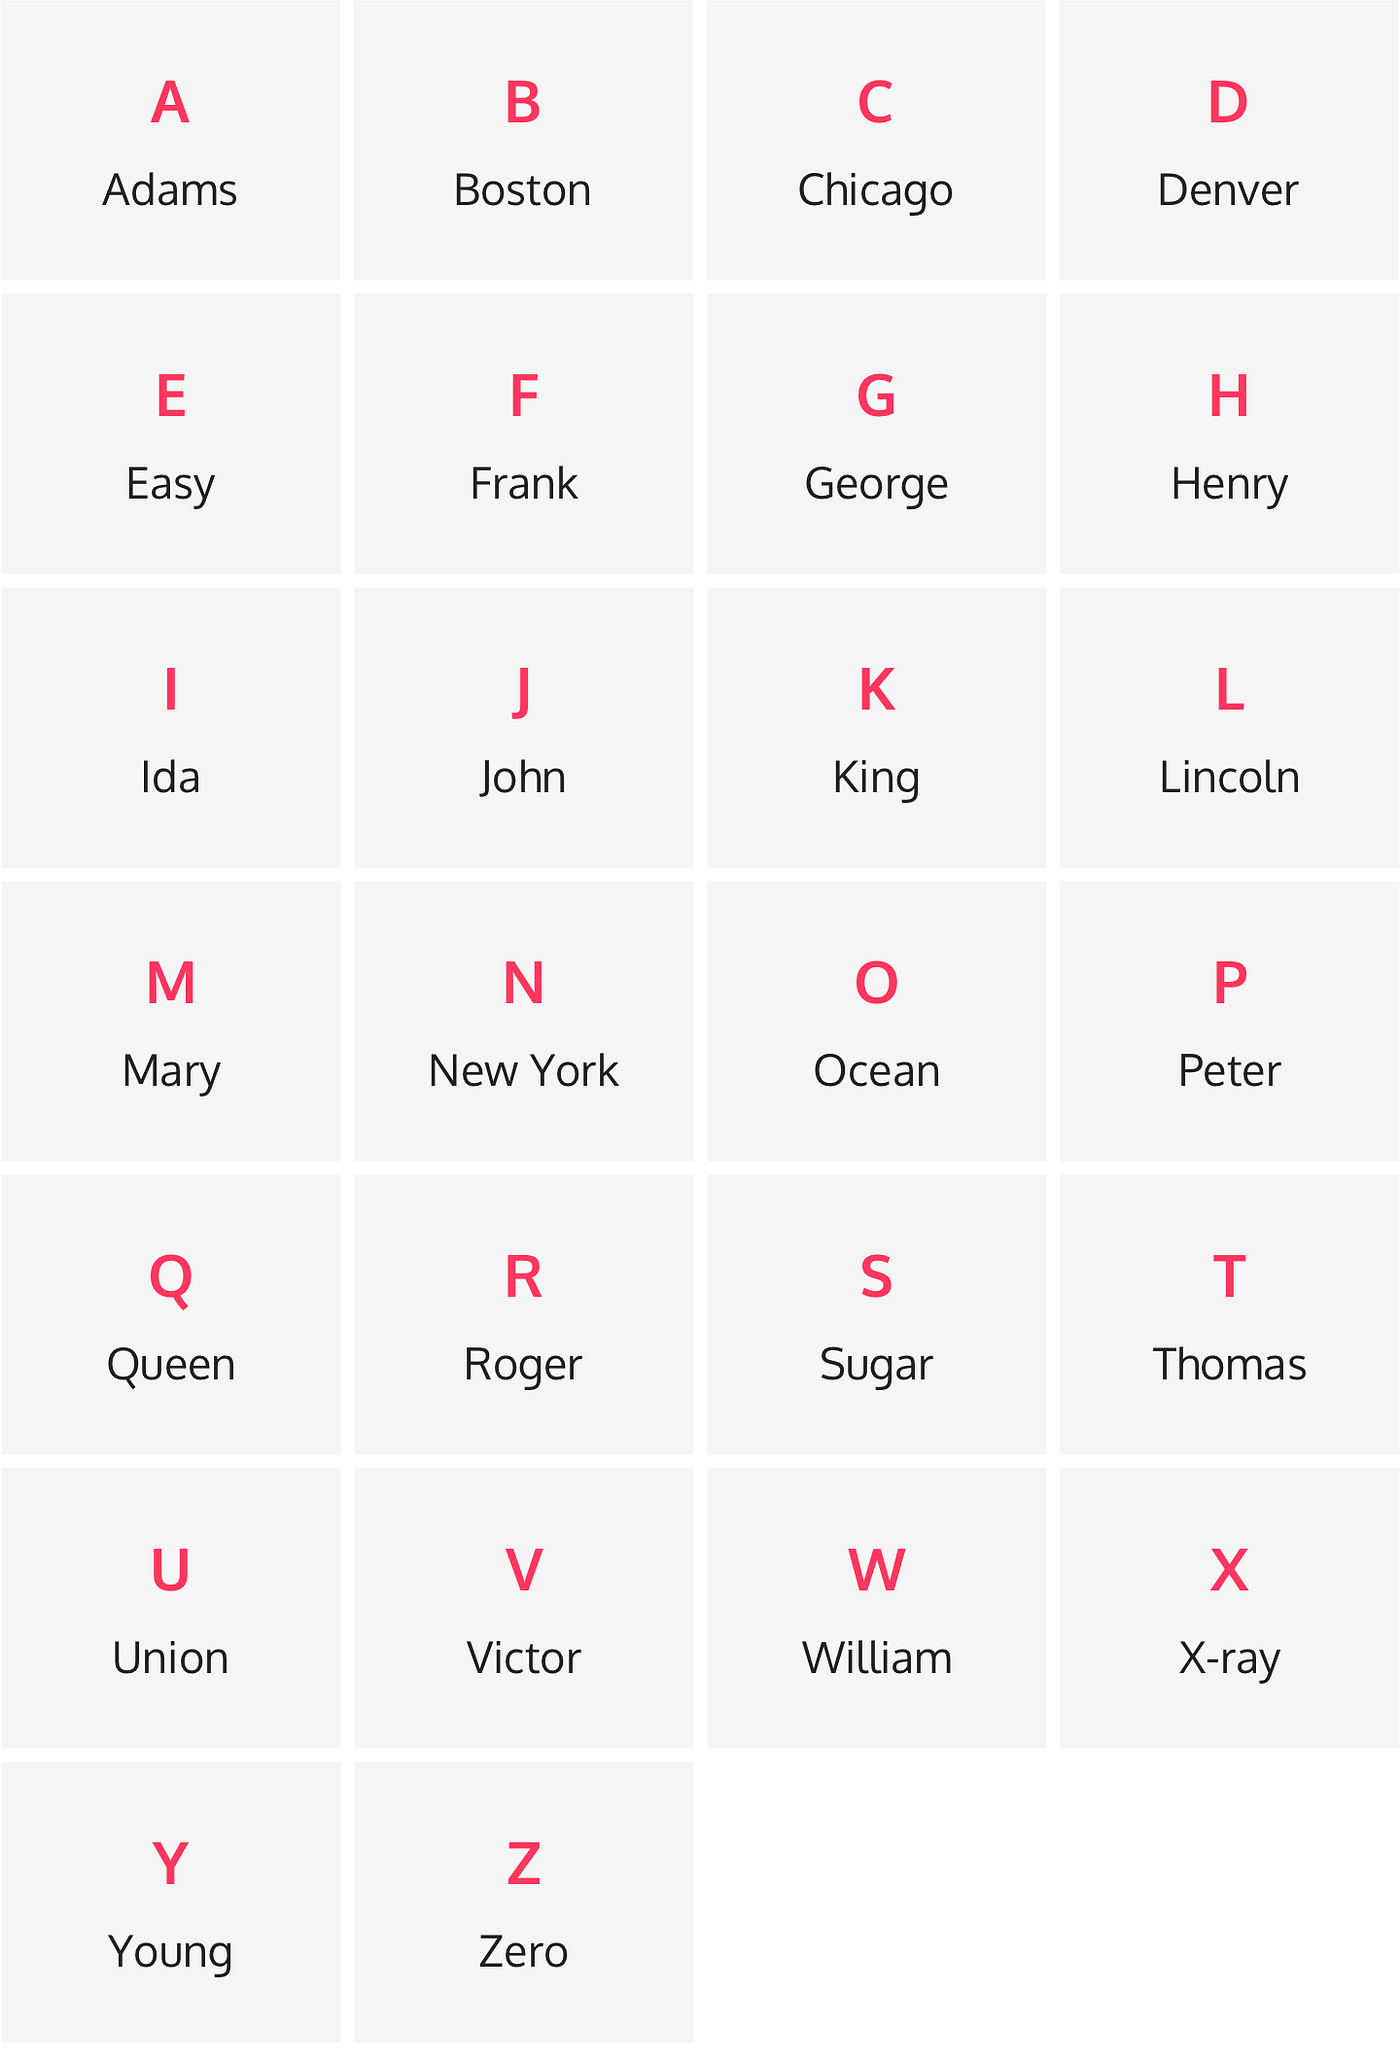 Major Scale Cheat Sheet - Letter Names Spelled Out